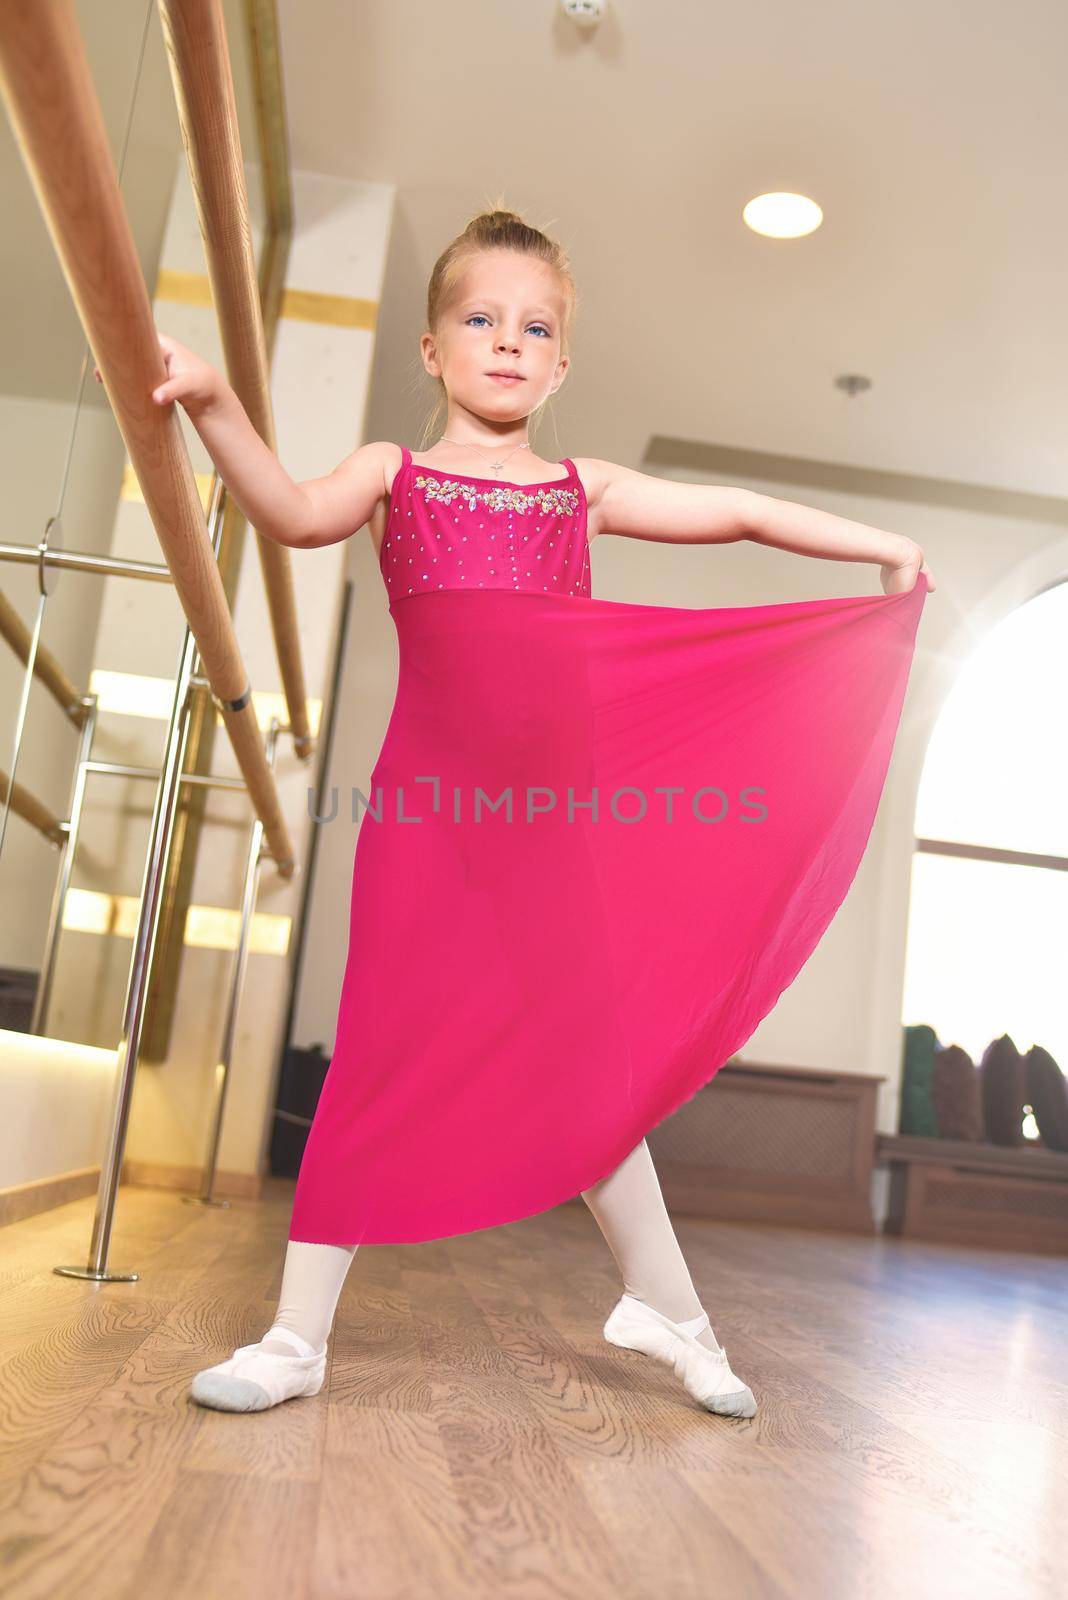 the charming little girl dreams of becoming a ballerina. The girl in the pink dress is dancing, holding on to the bar.Baby girl is studying ballet.